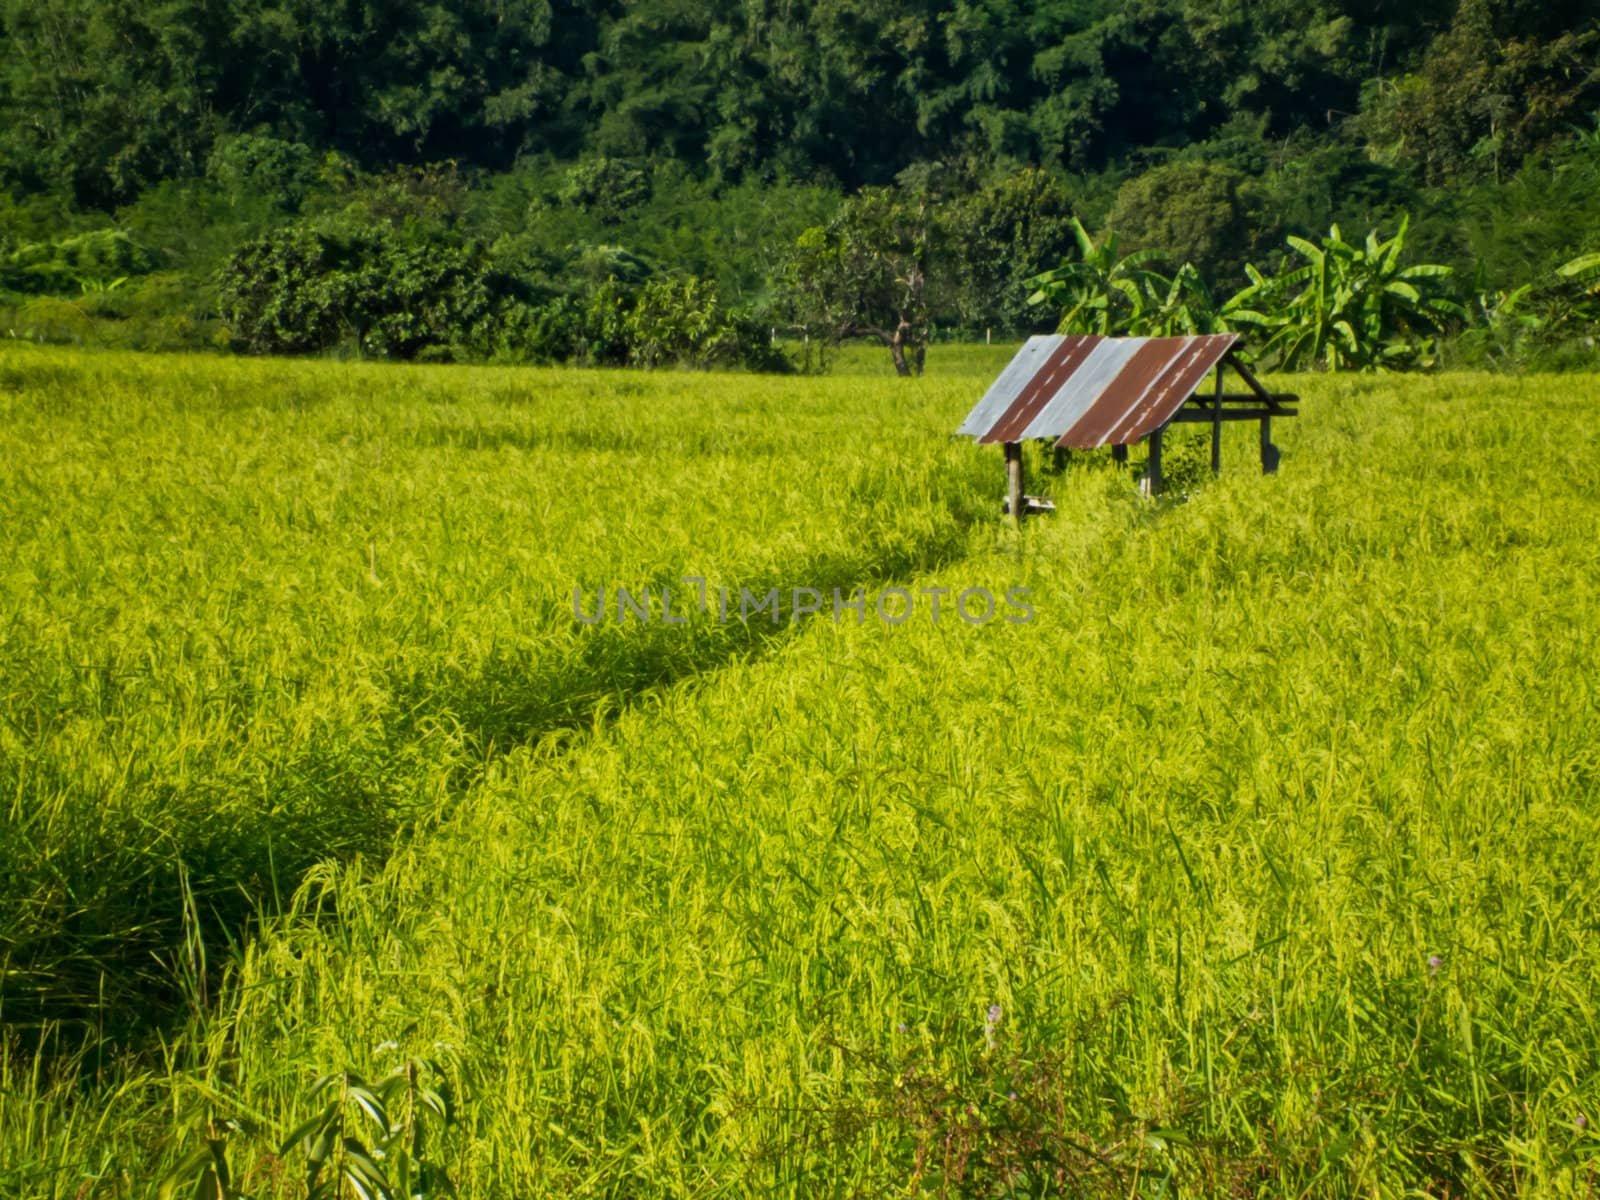 this is cottage in rice fileld ,it's have yellow and green scene